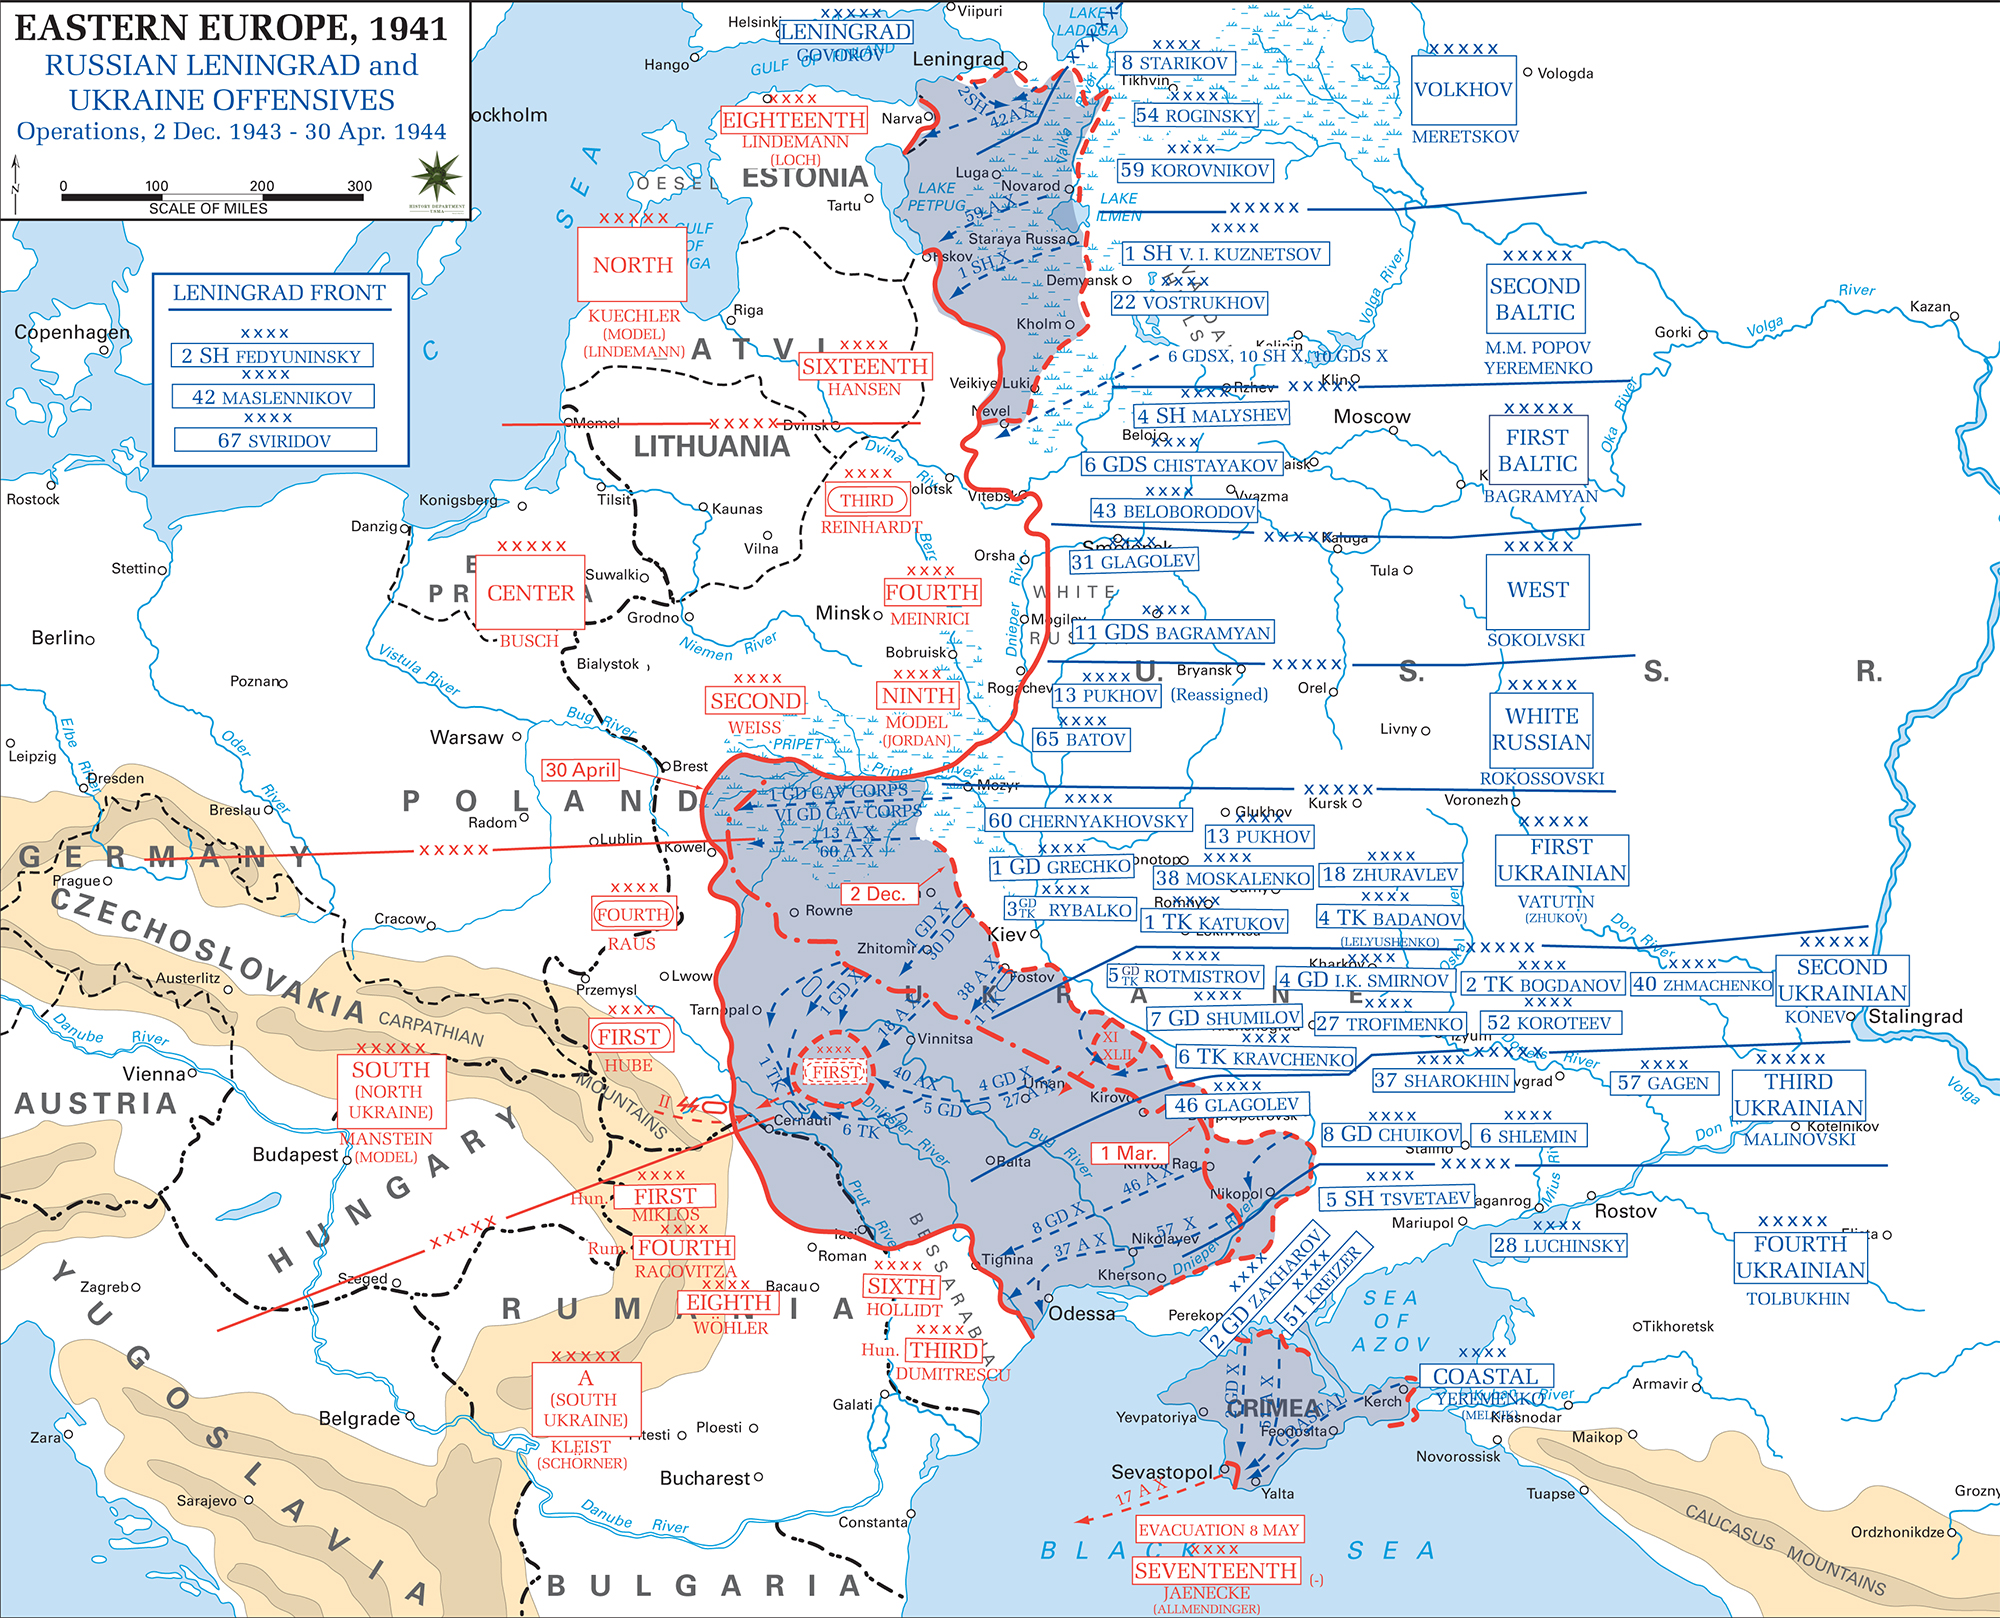 Map of WWII: Russia 1943/44. Leningrad and Ukraine Offensives December 2, 1943 - April 30, 1944